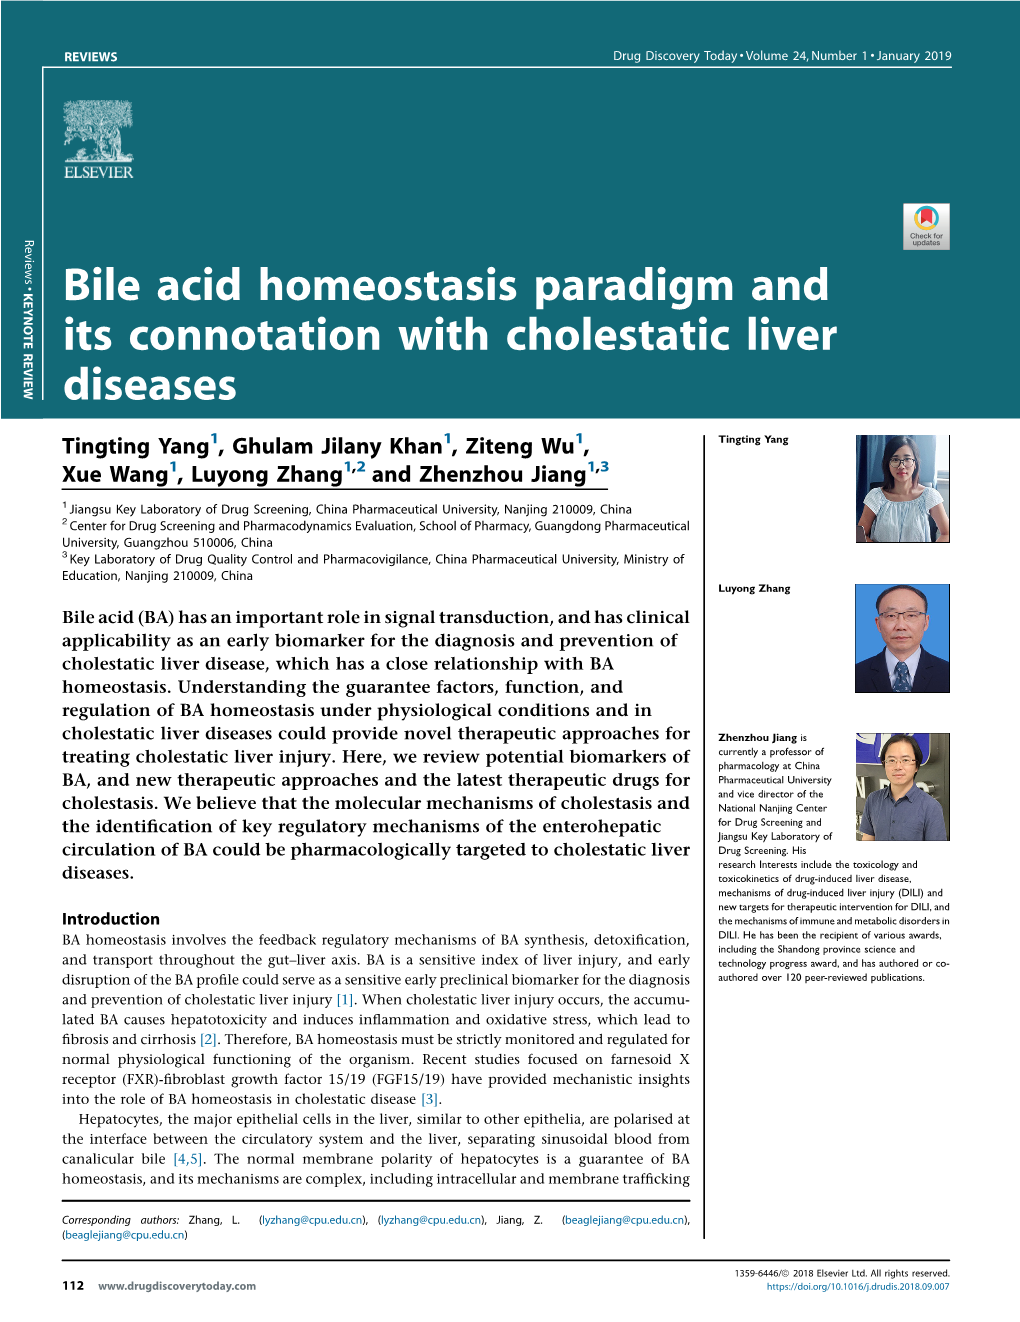 Bile Acid Homeostasis Paradigm and Its Connotation with Cholestatic Liver Diseases